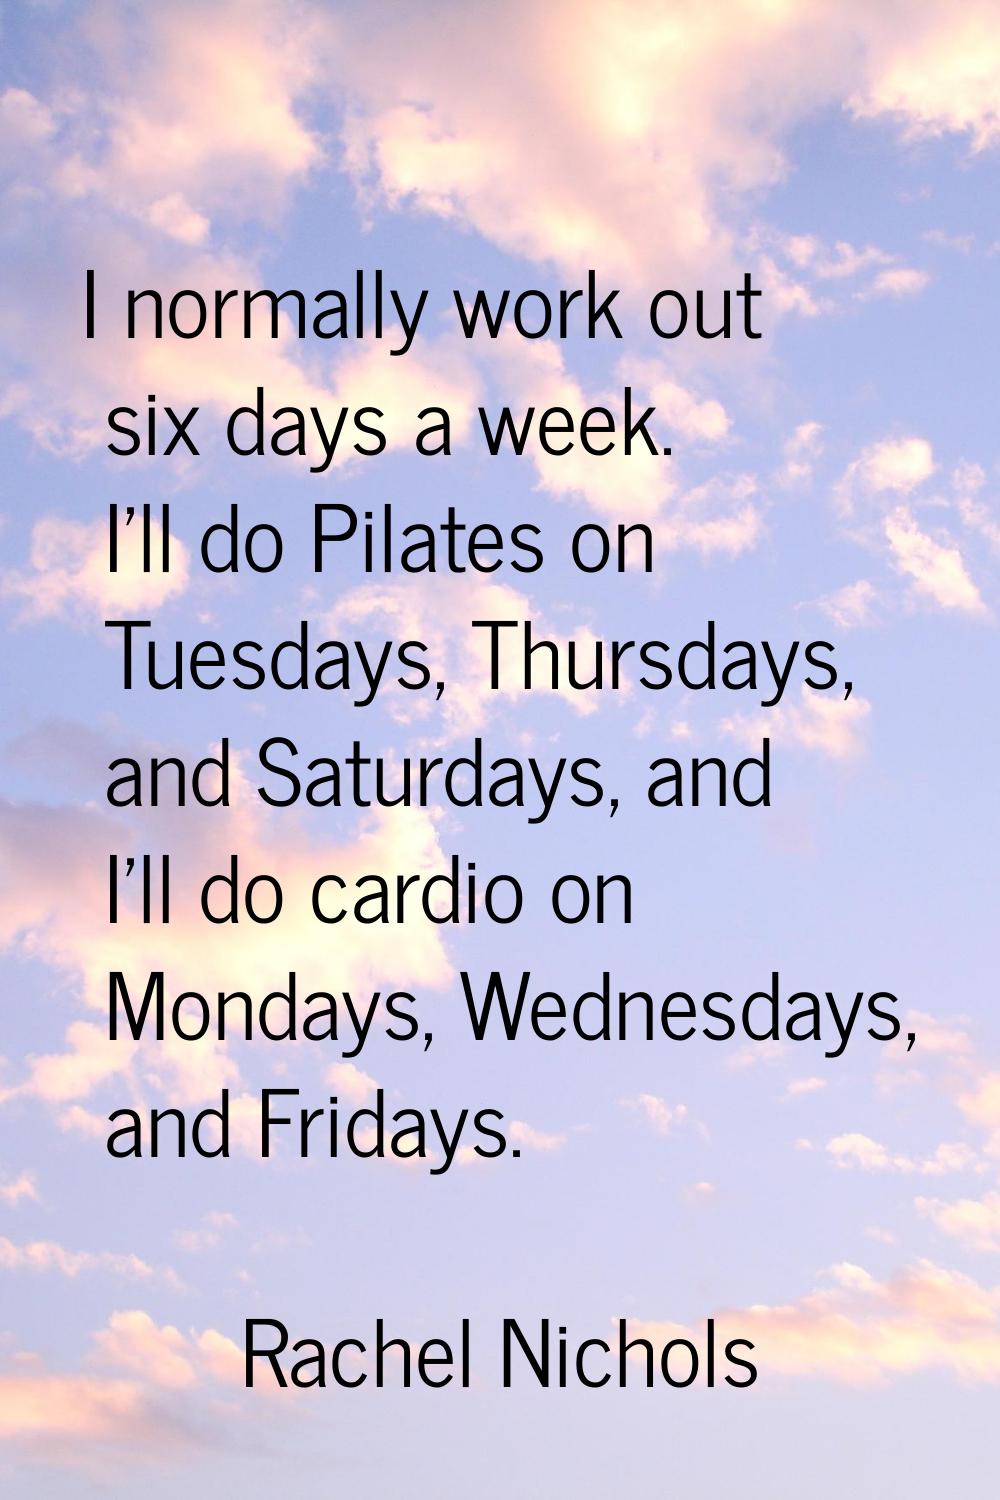 I normally work out six days a week. I'll do Pilates on Tuesdays, Thursdays, and Saturdays, and I'l